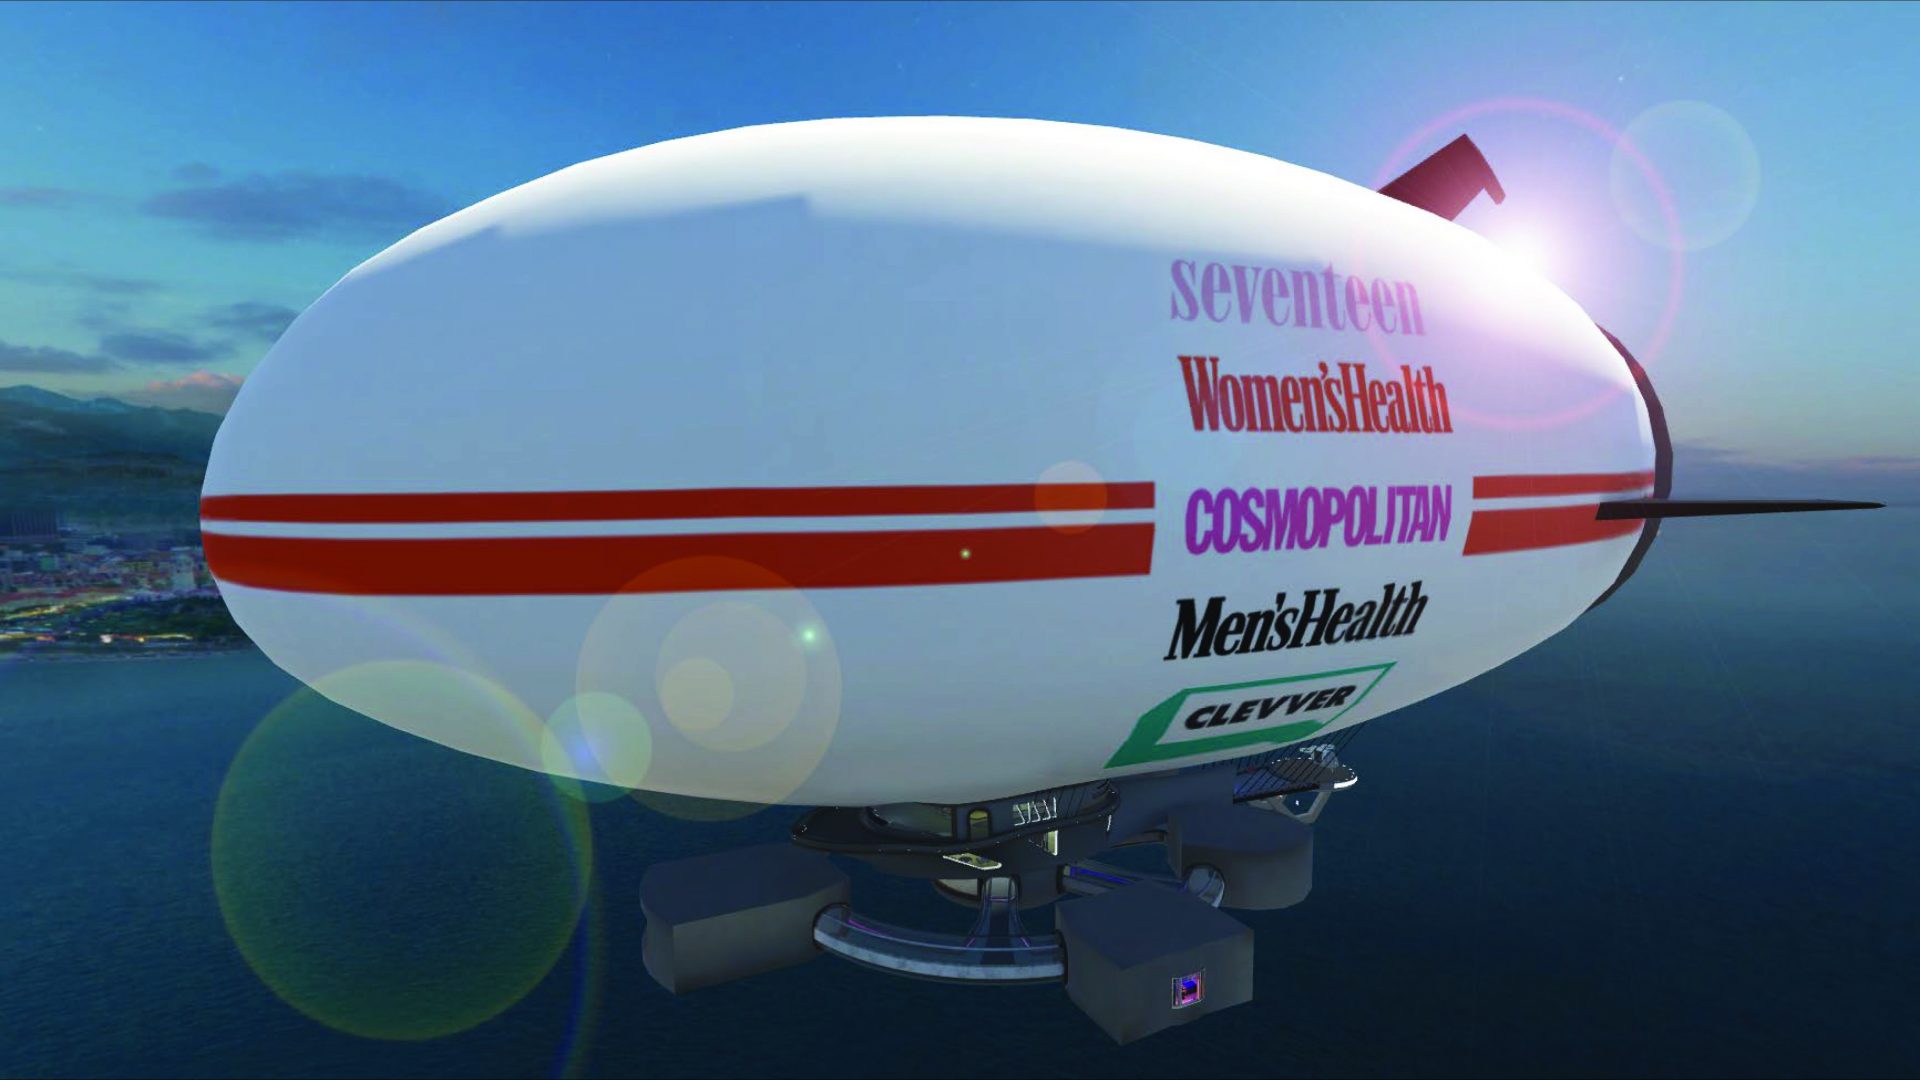 Hearst launches blimp within the metaverse in a open as much as show conceal advertisers virtual co-branded opportunities